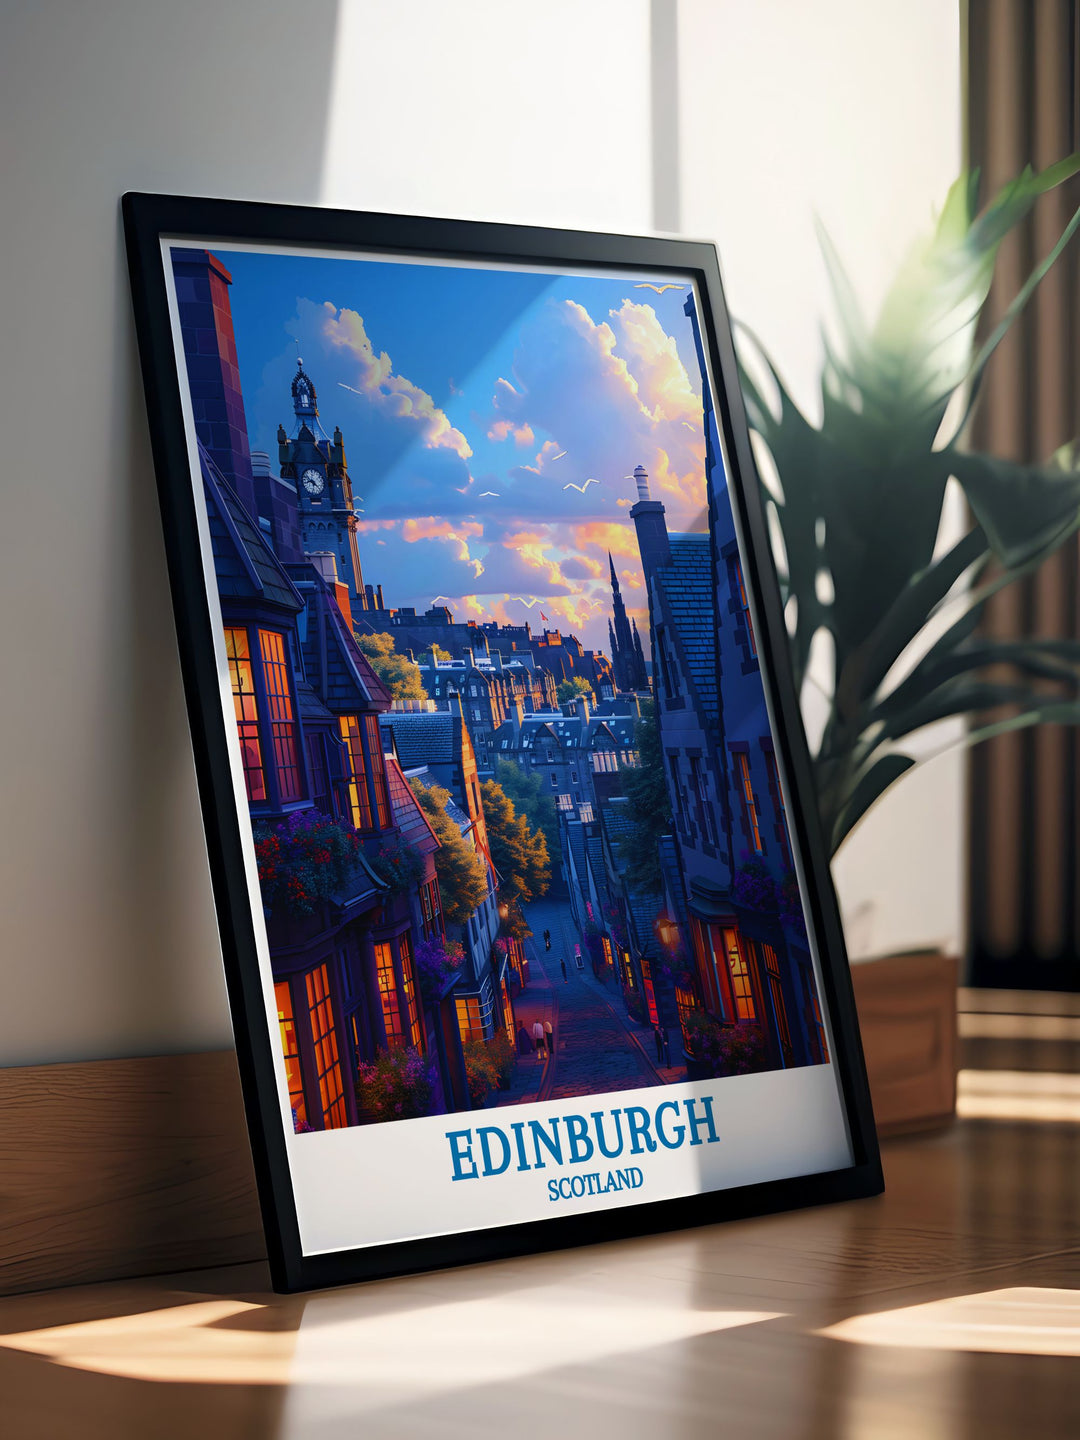 Vintage poster of Edinburghs Royal Mile, reflecting the unique character and historical depth of this iconic street.